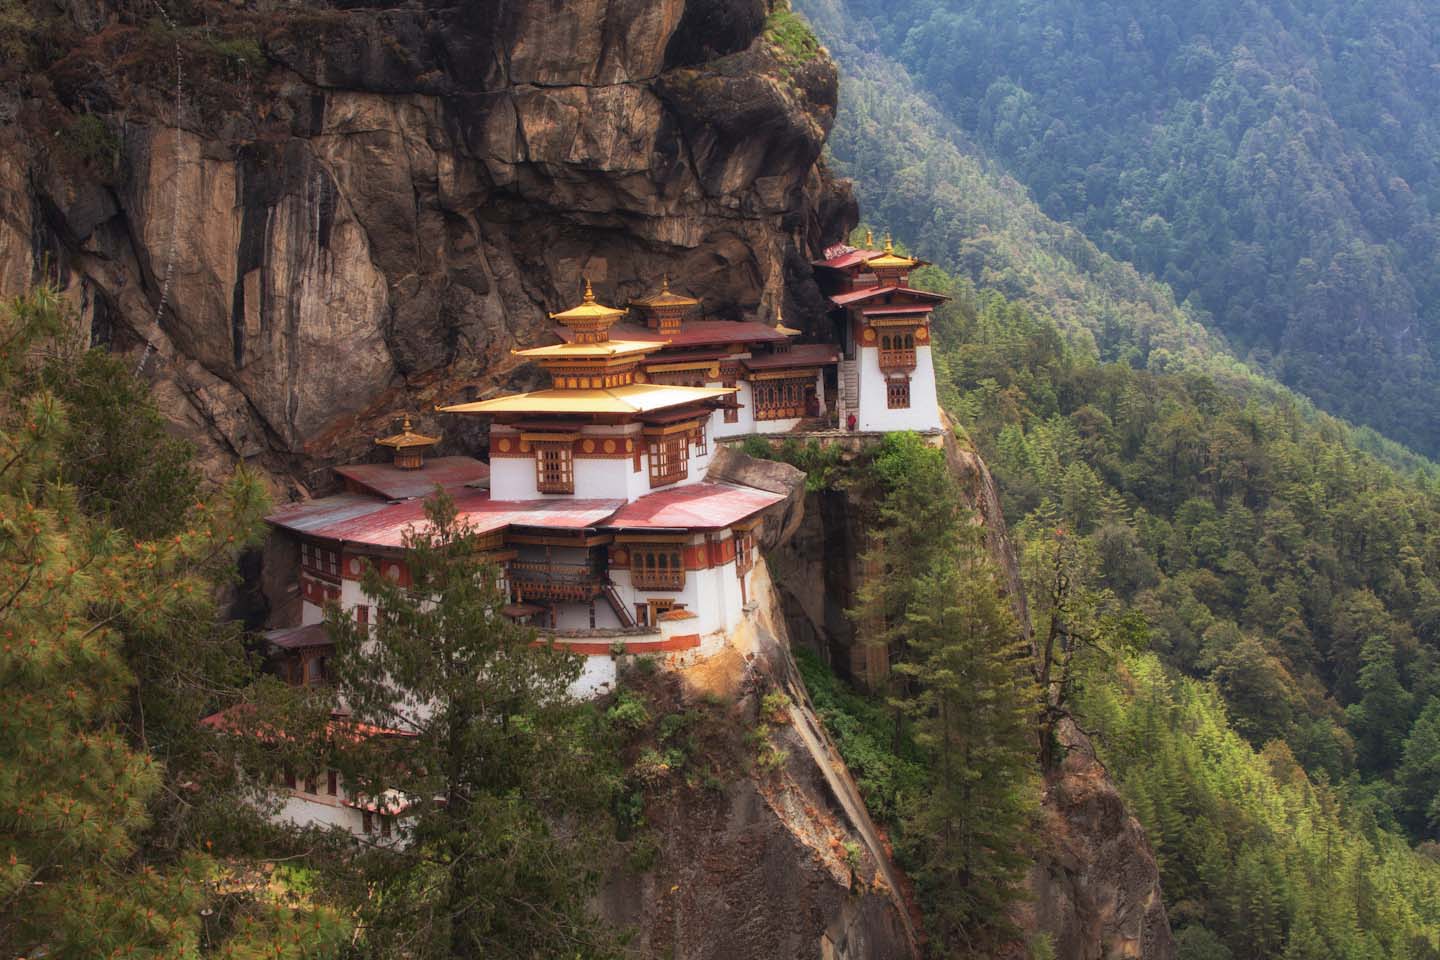 Tiger’s Nest « Where in the World are the Brills?